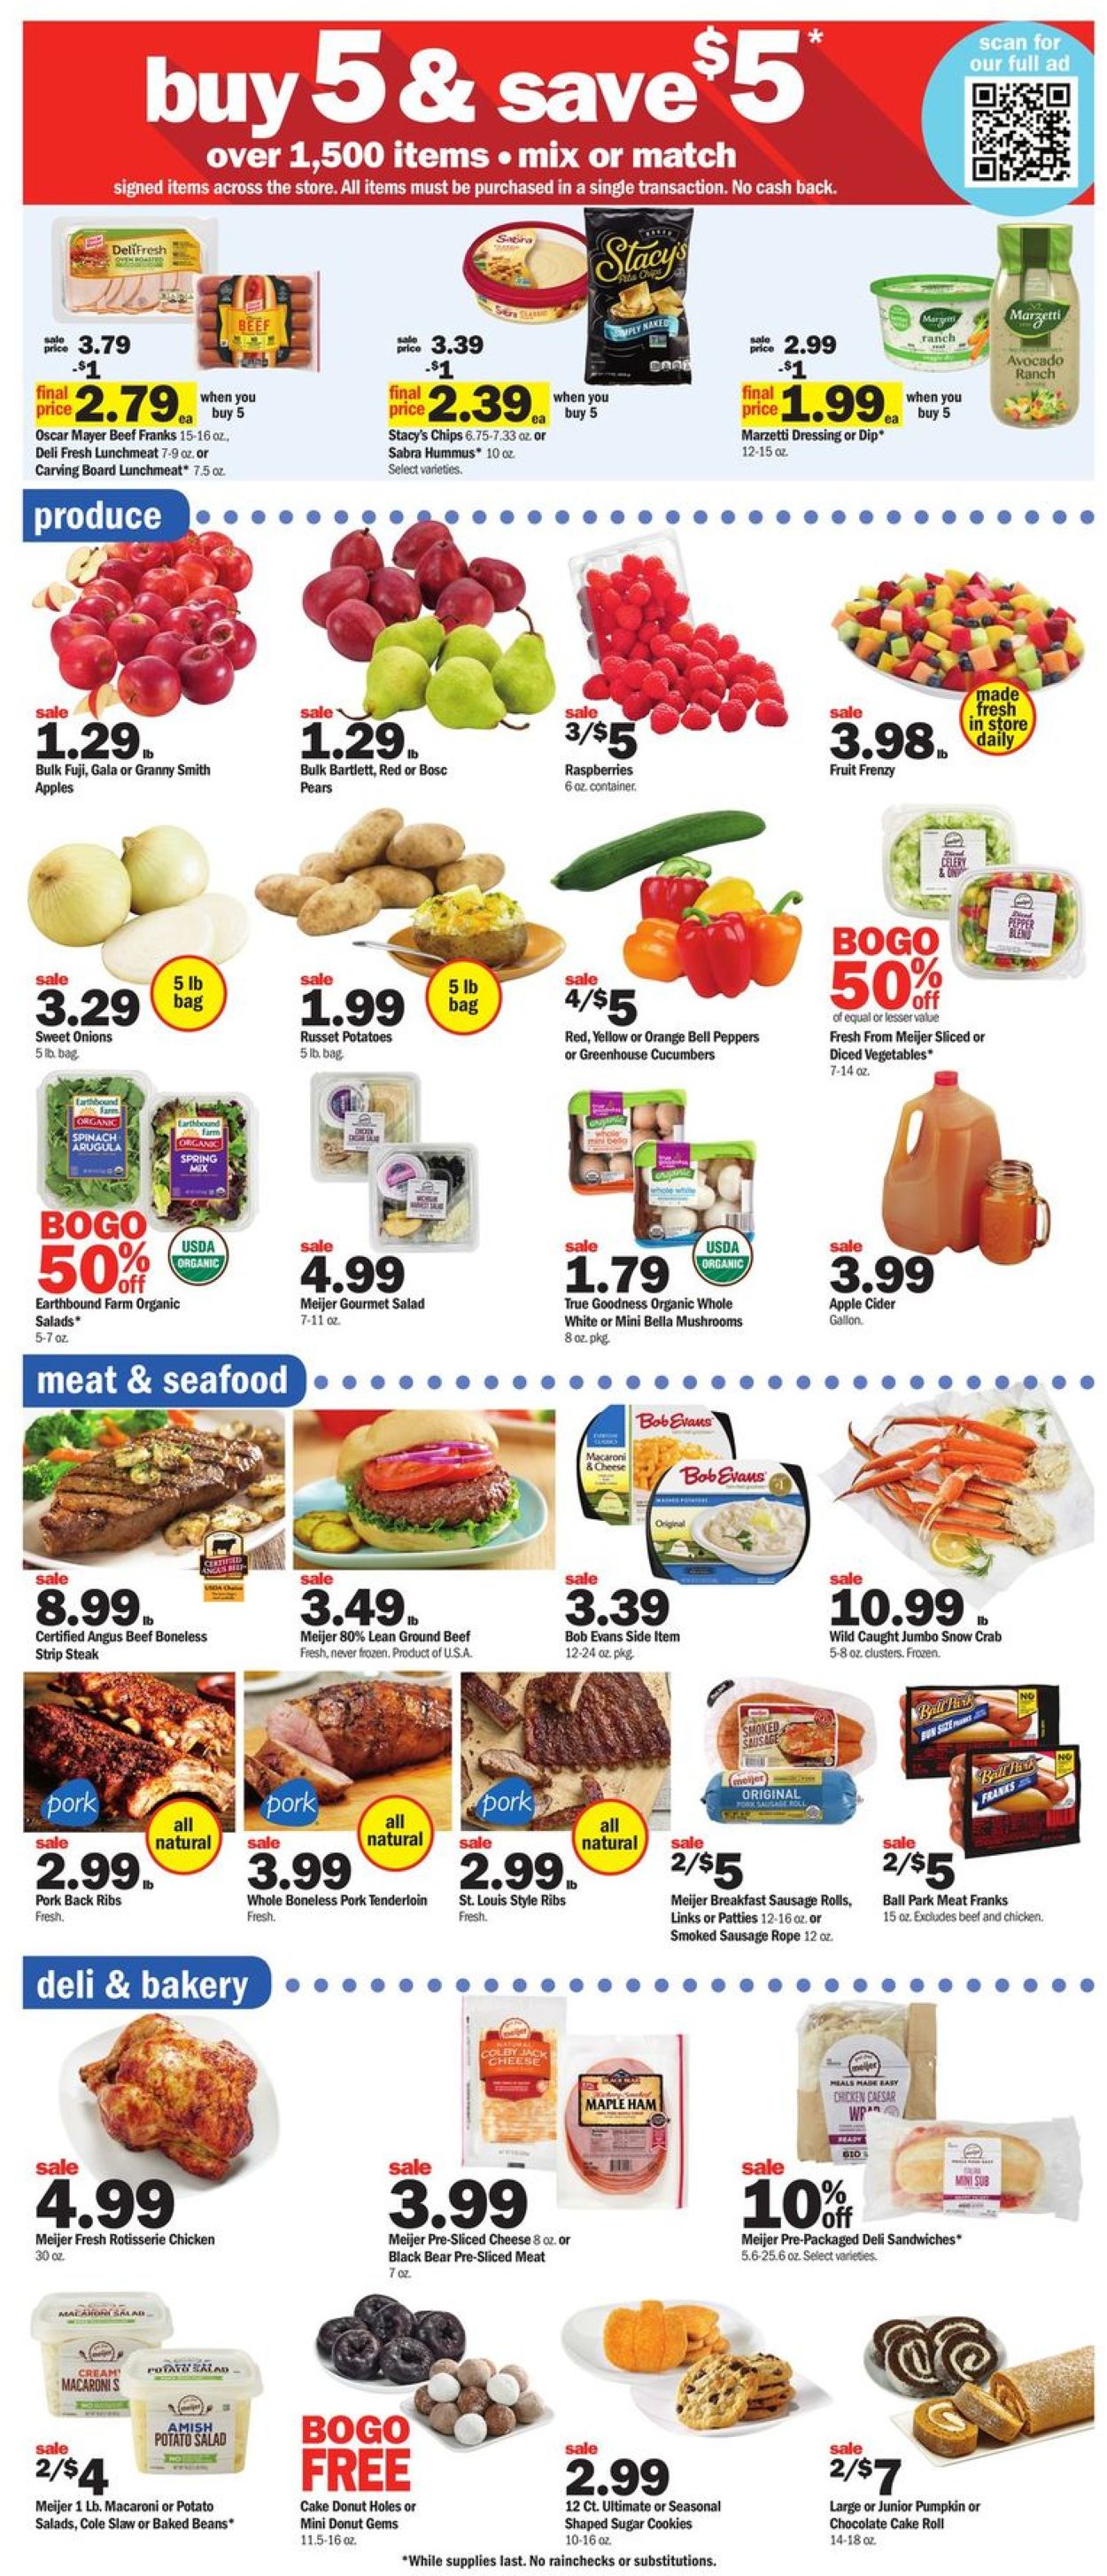 Meijer Current weekly ad 10/18 - 10/24/2020 [2] - frequent-ads.com